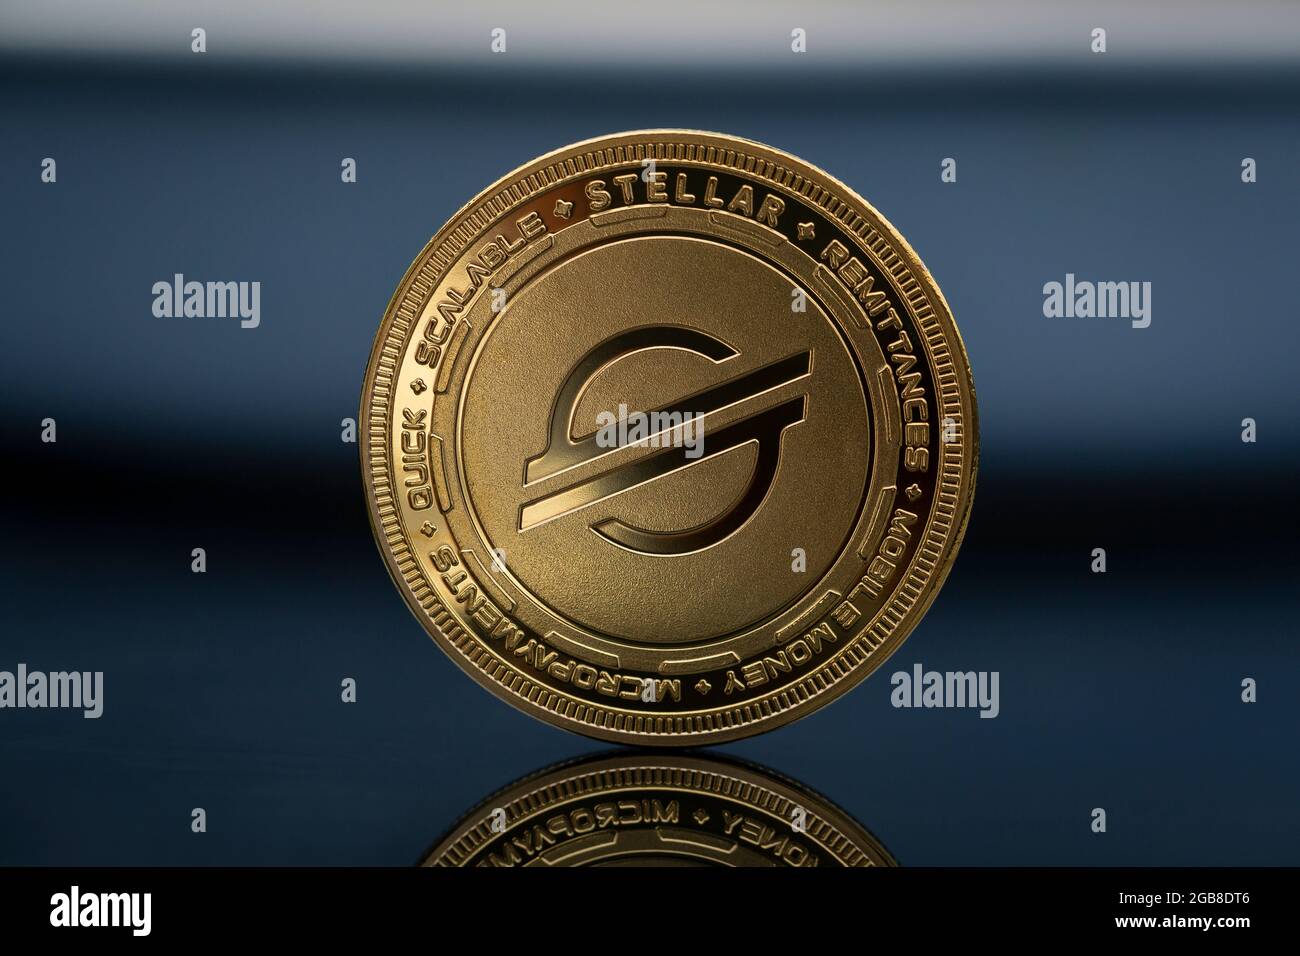 Stellar XLM Lumens Cryptocurrency physical coin placed on the reflective  blue surface Stock Photo - Alamy